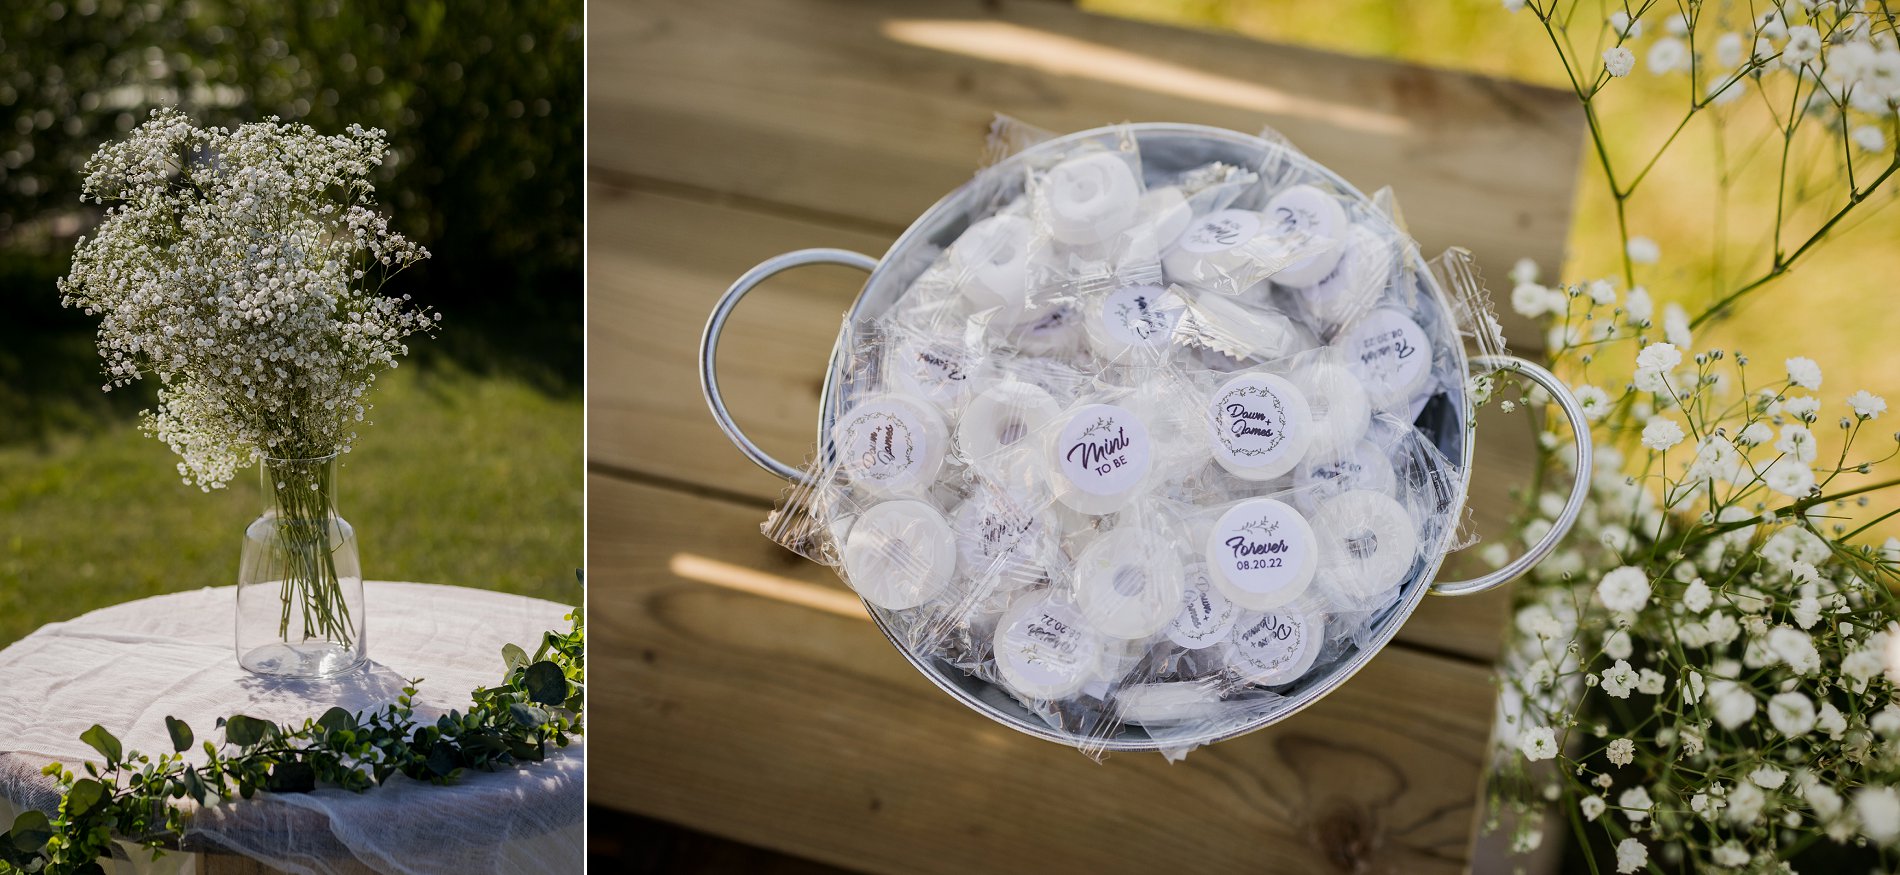 outdoor wedding ceremony decor with custom mints and baby's breath